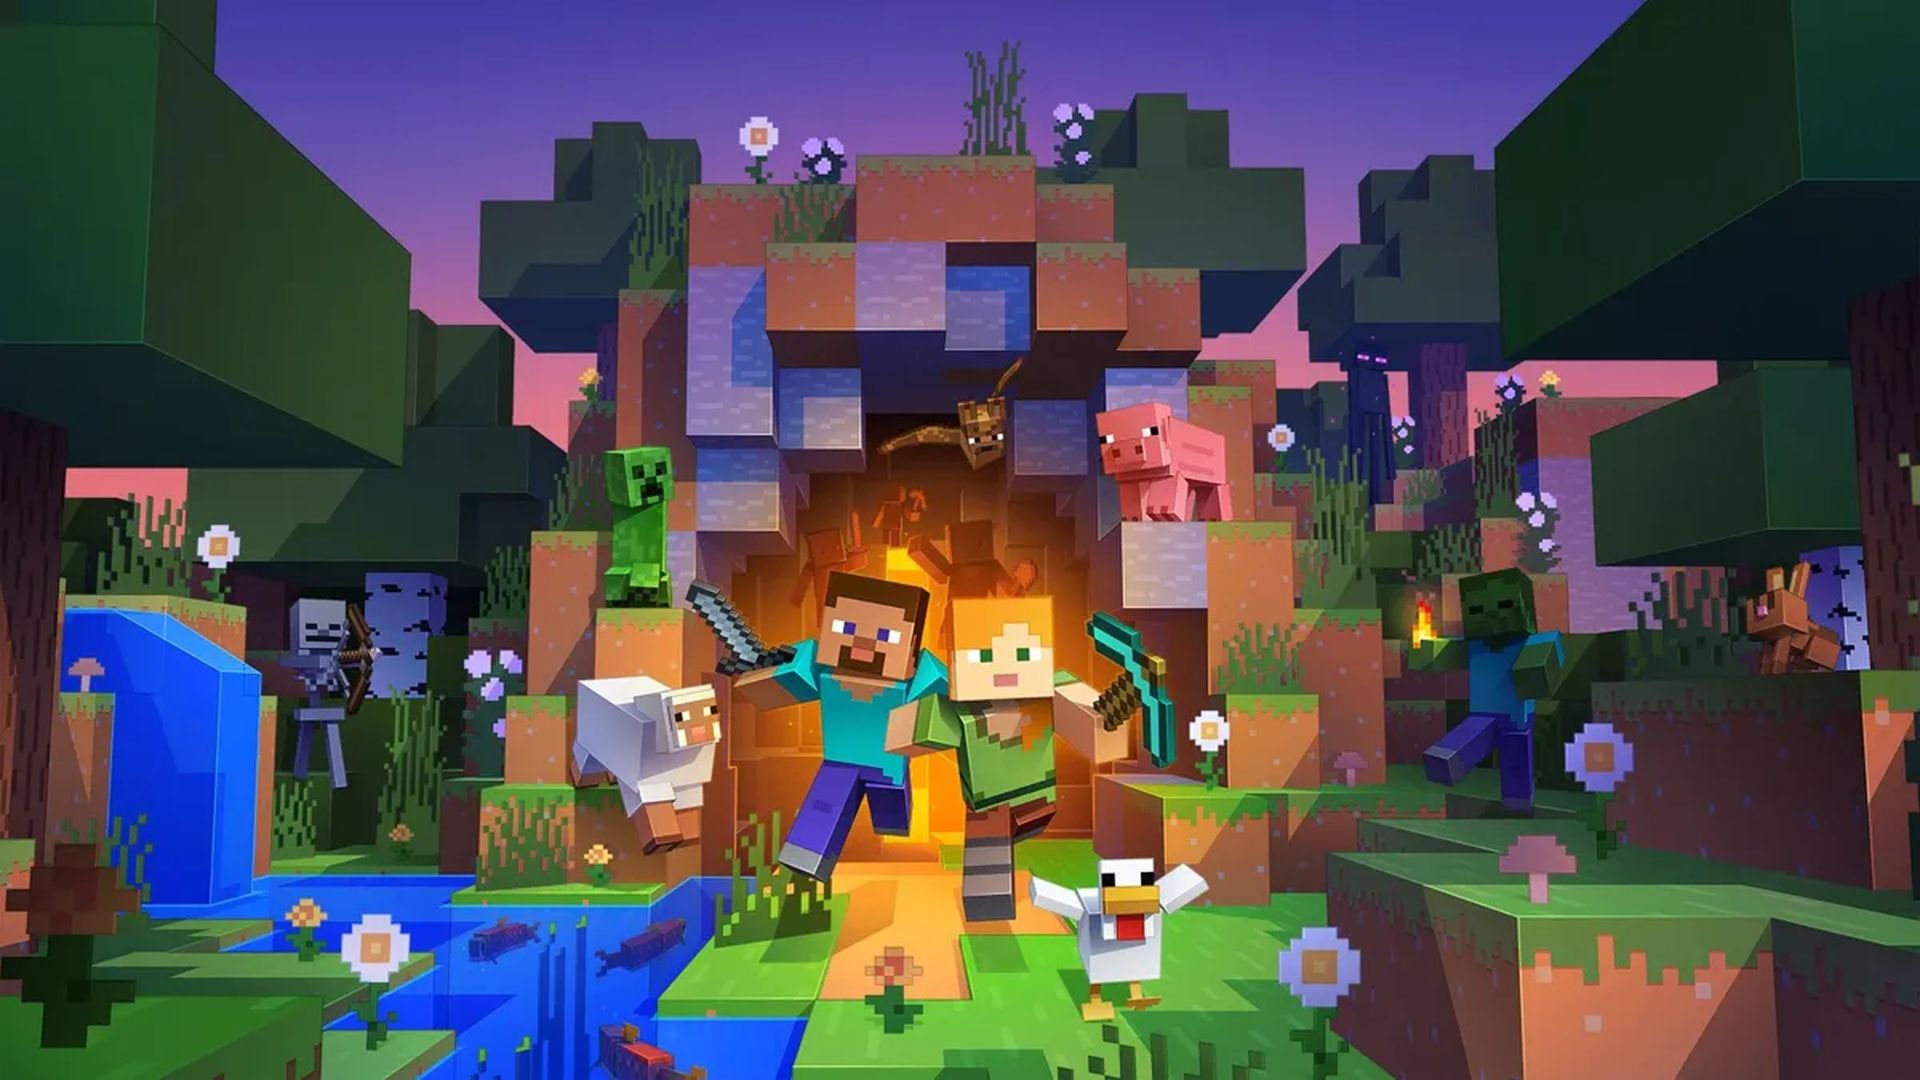 Minecraft Bedrock Edition received a new update and related patch notes.